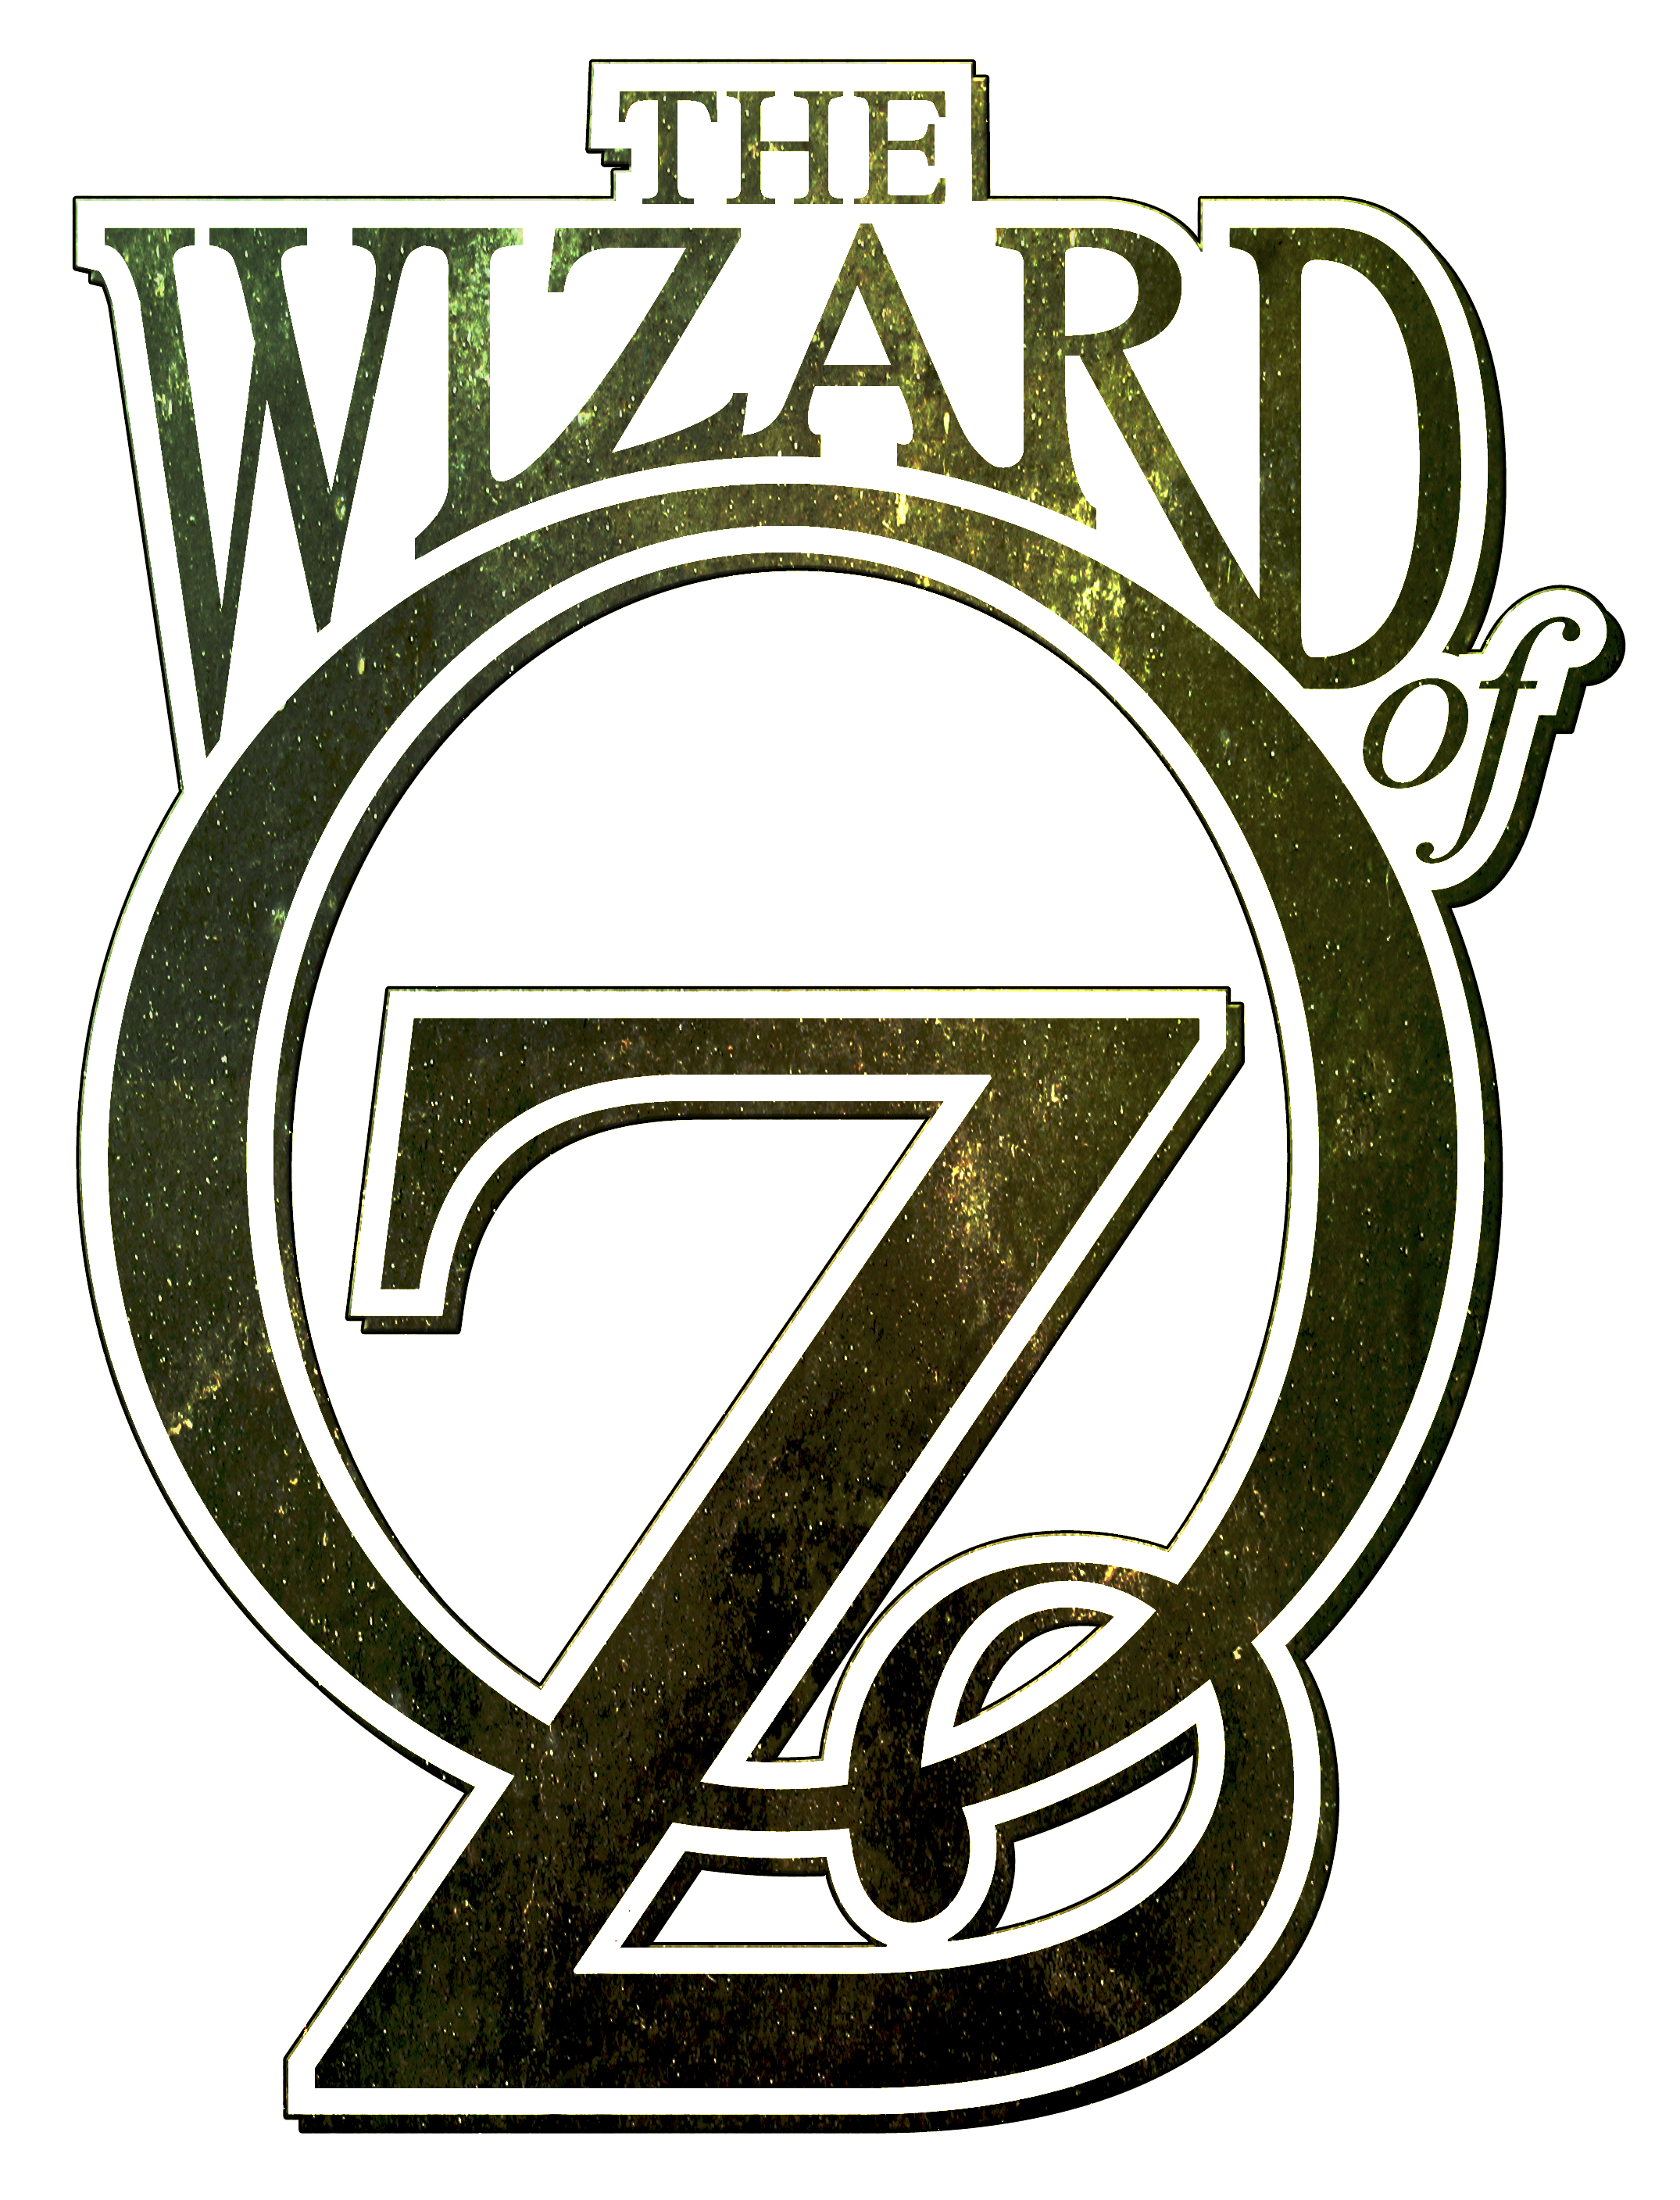 Image result for wizard of Oz logos in 2019.